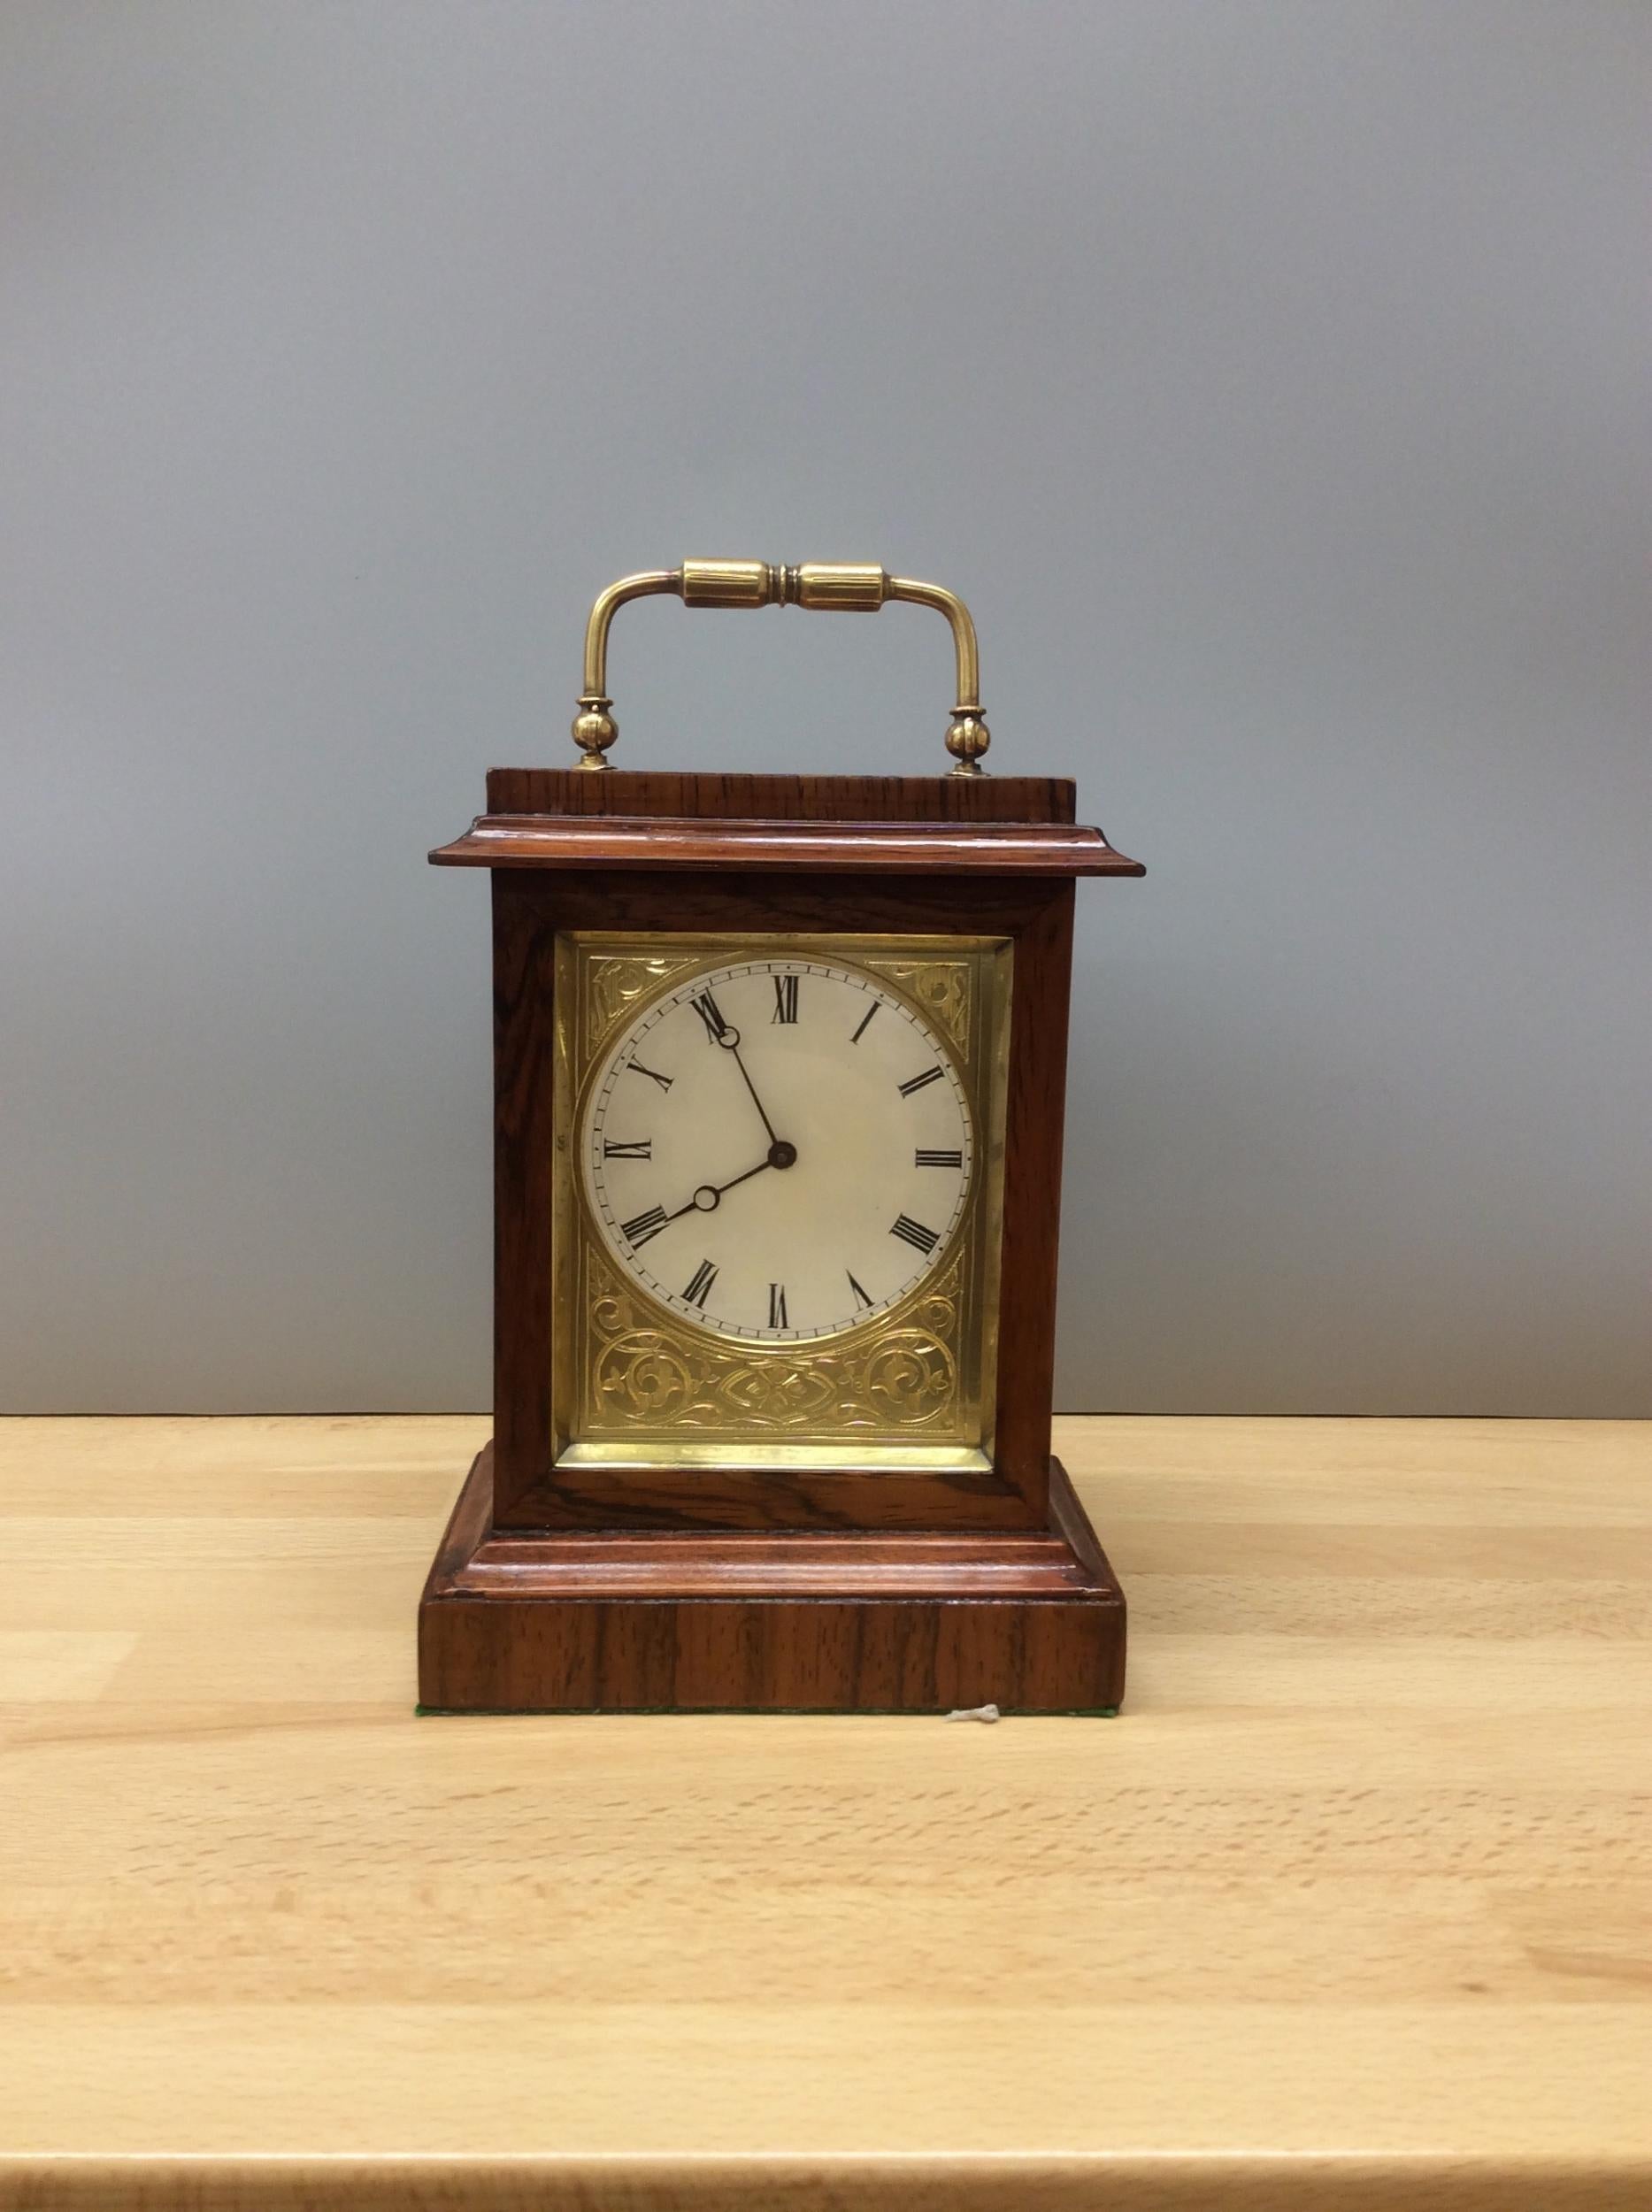 Miniature rosewood French mantel clock

Miniature French mantel clock in a rosewood case sitting on a moulded plinth with brass carrying handle.

Engraved gilded mask surrounding an enamel dial with Roman numerals and original ‘blued’ steel